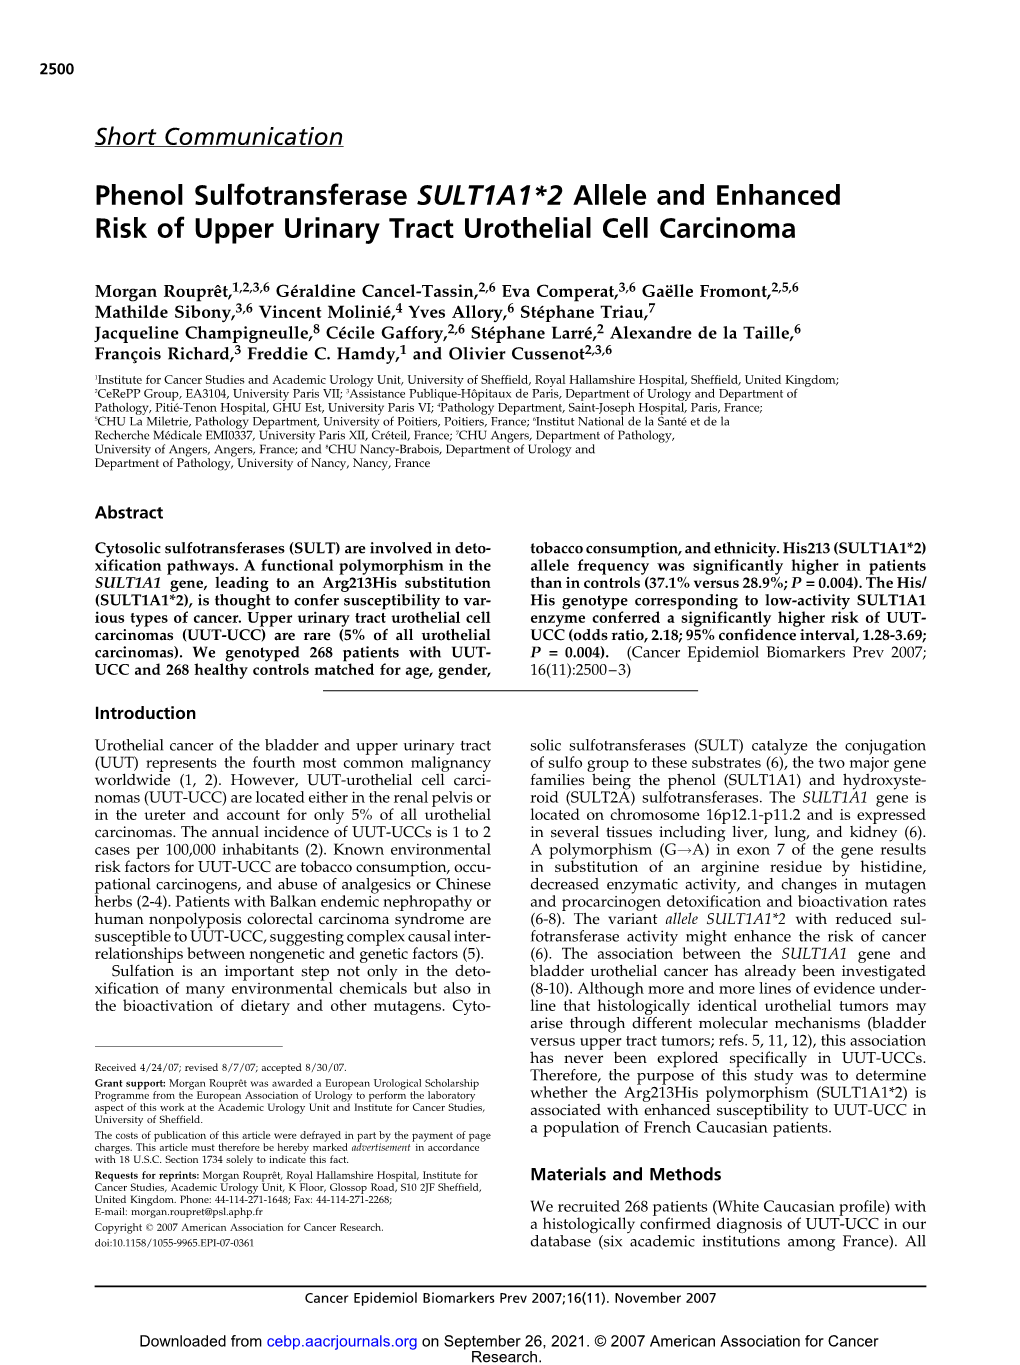 Phenol Sulfotransferase SULT1A1*2 Allele and Enhanced Risk of Upper Urinary Tract Urothelial Cell Carcinoma